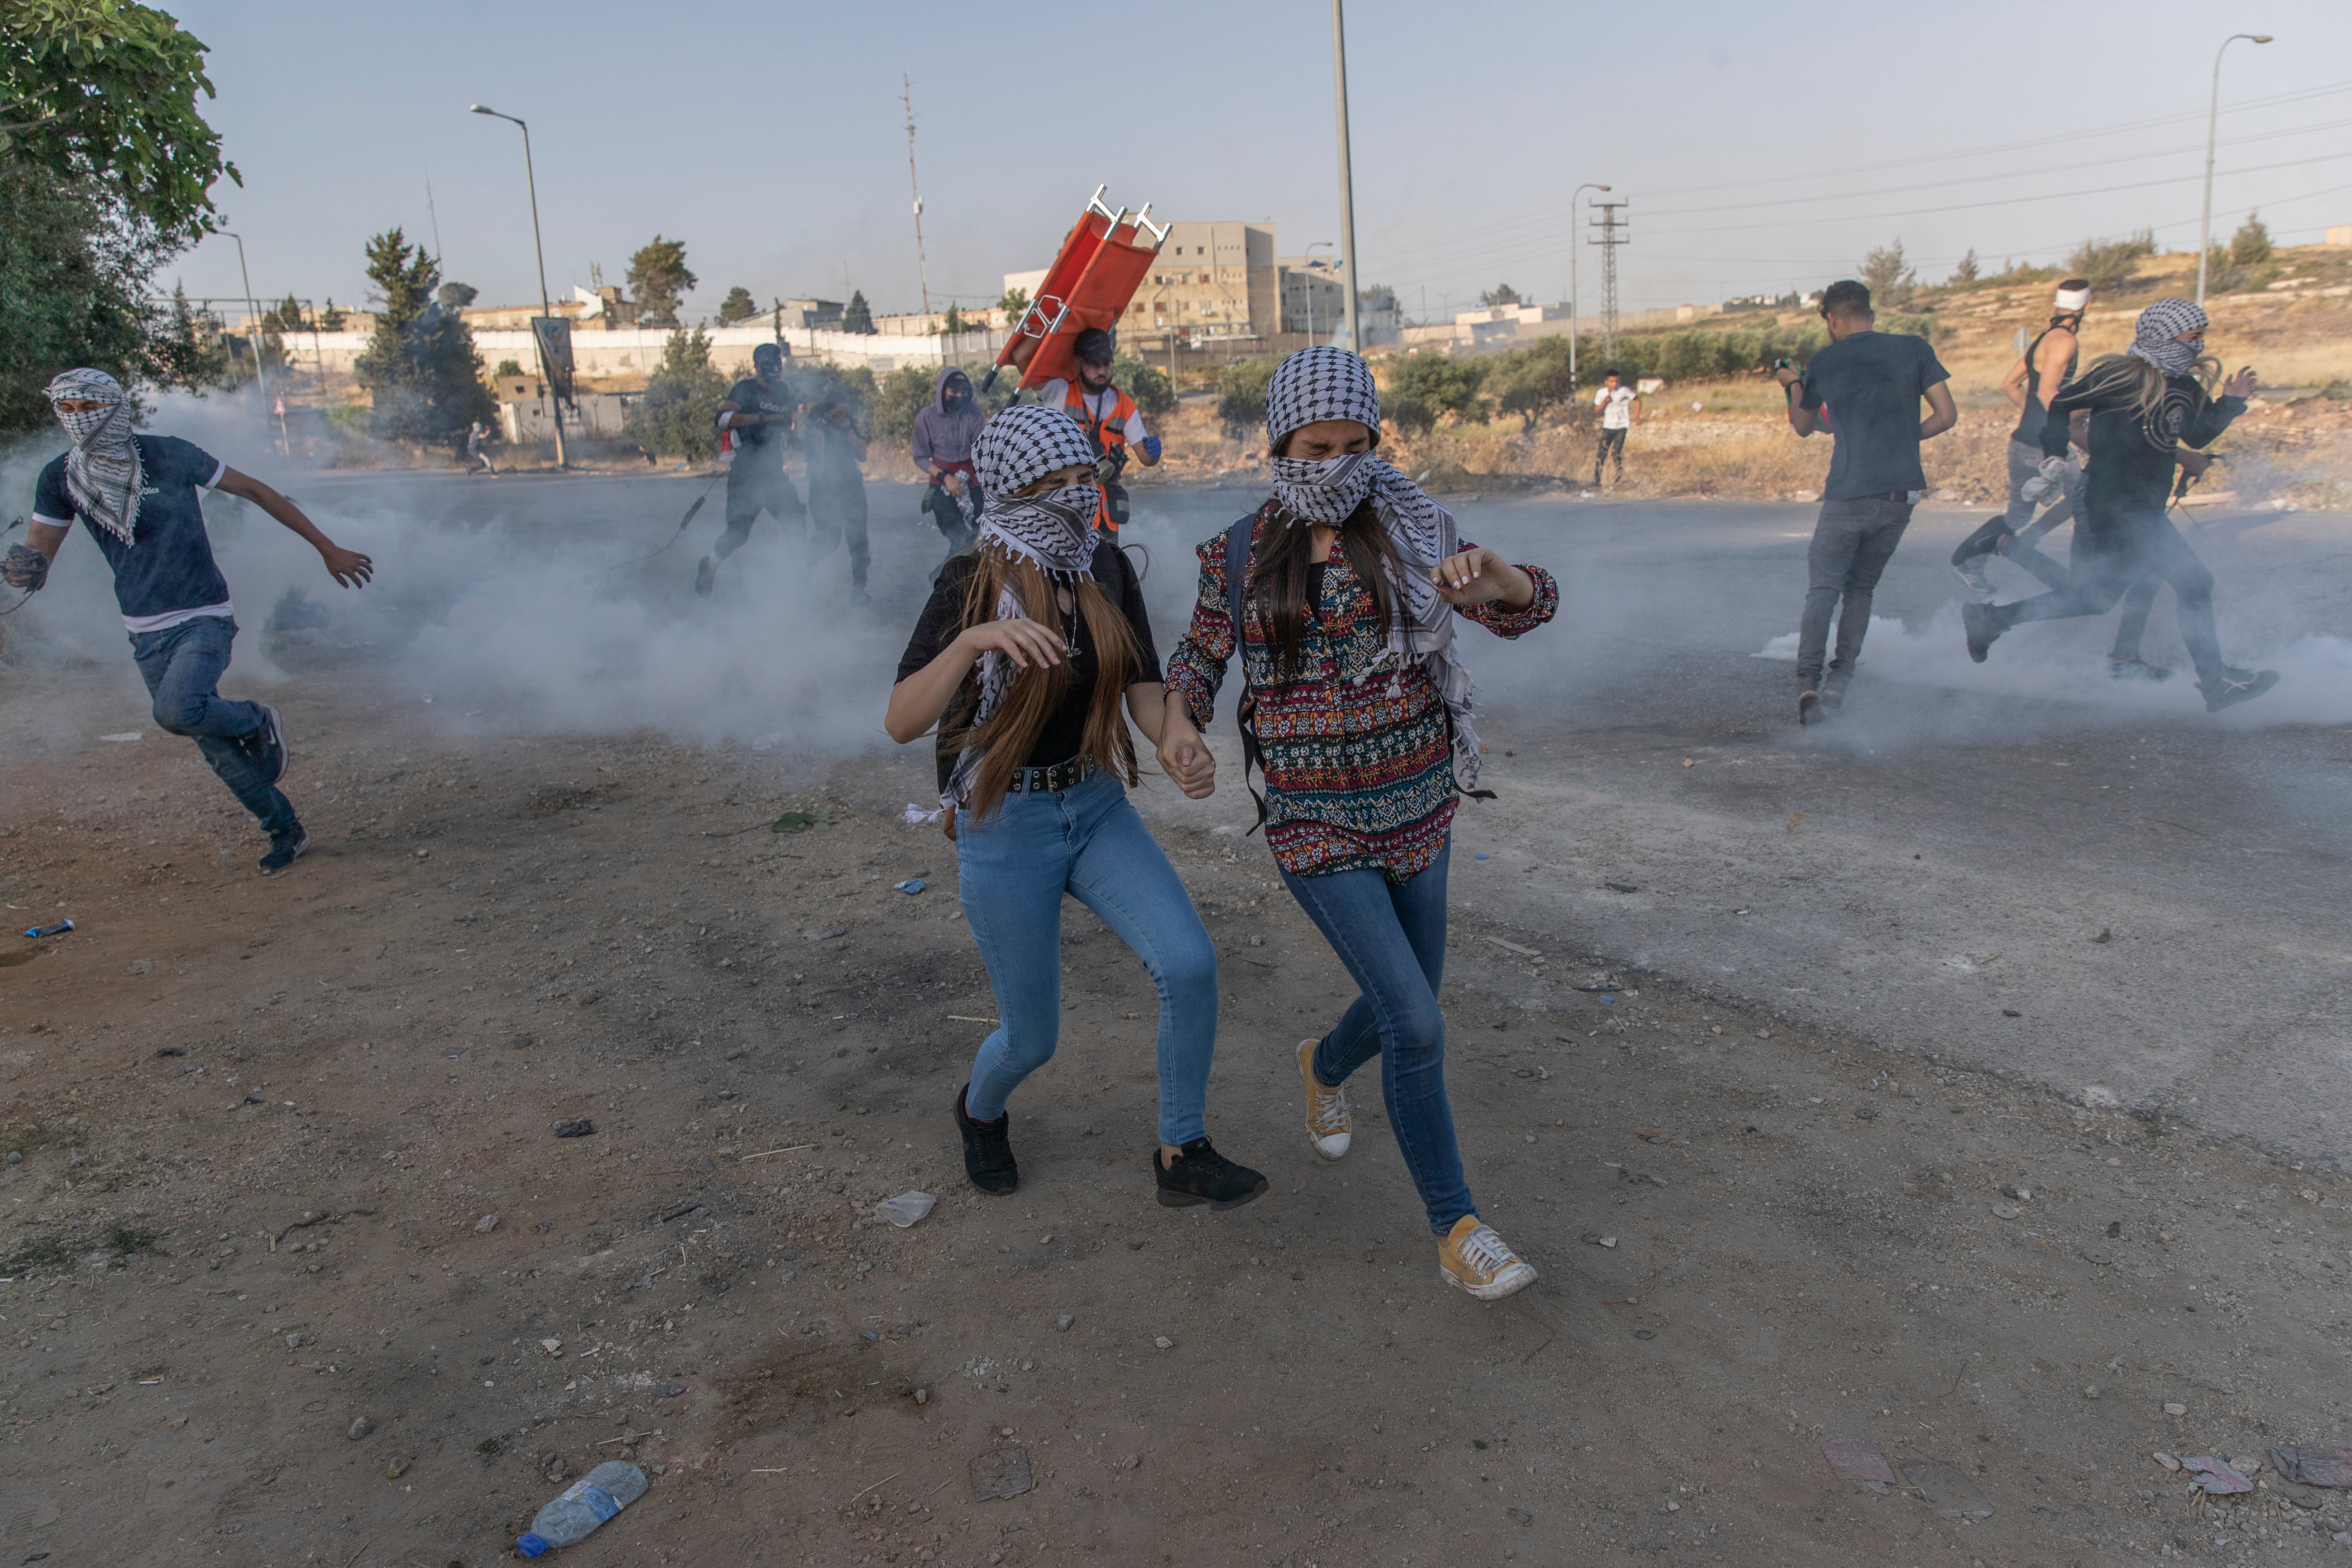 Palestinian protesters run to avoid teargas during clashes with Israeli soldiers at the northern entrance of the West Bank city of Ramallah